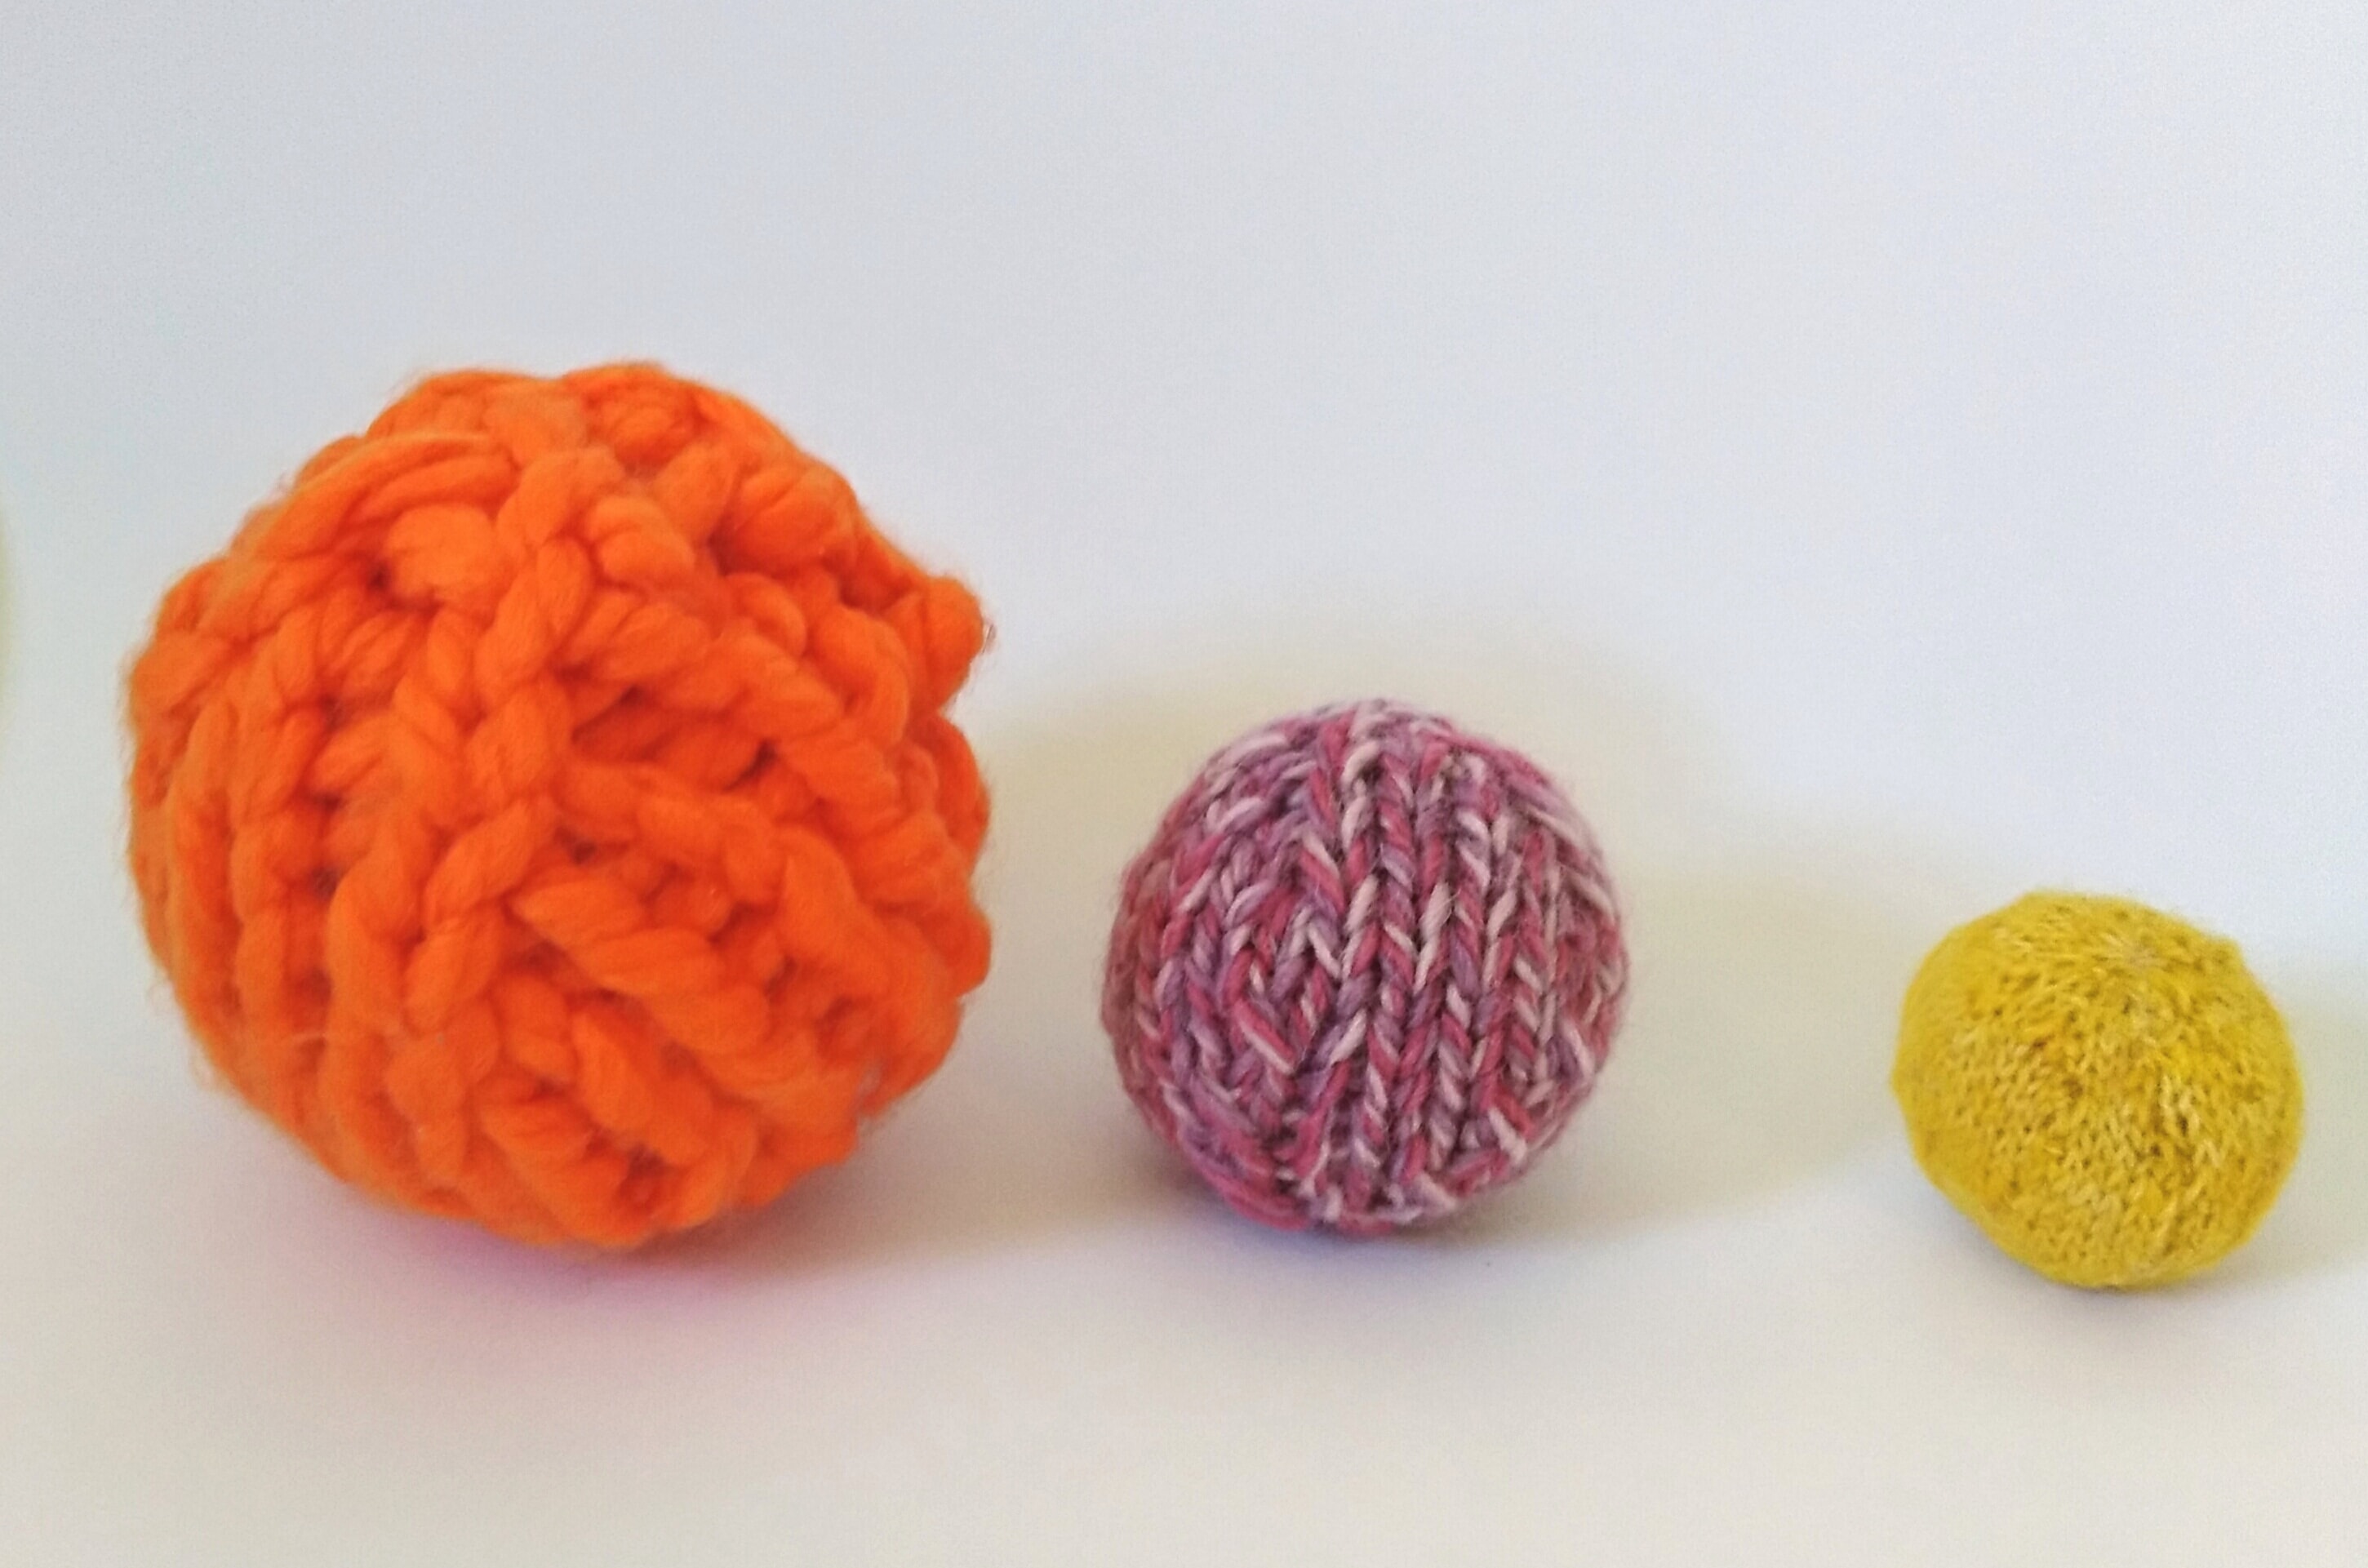 Knitted spheres